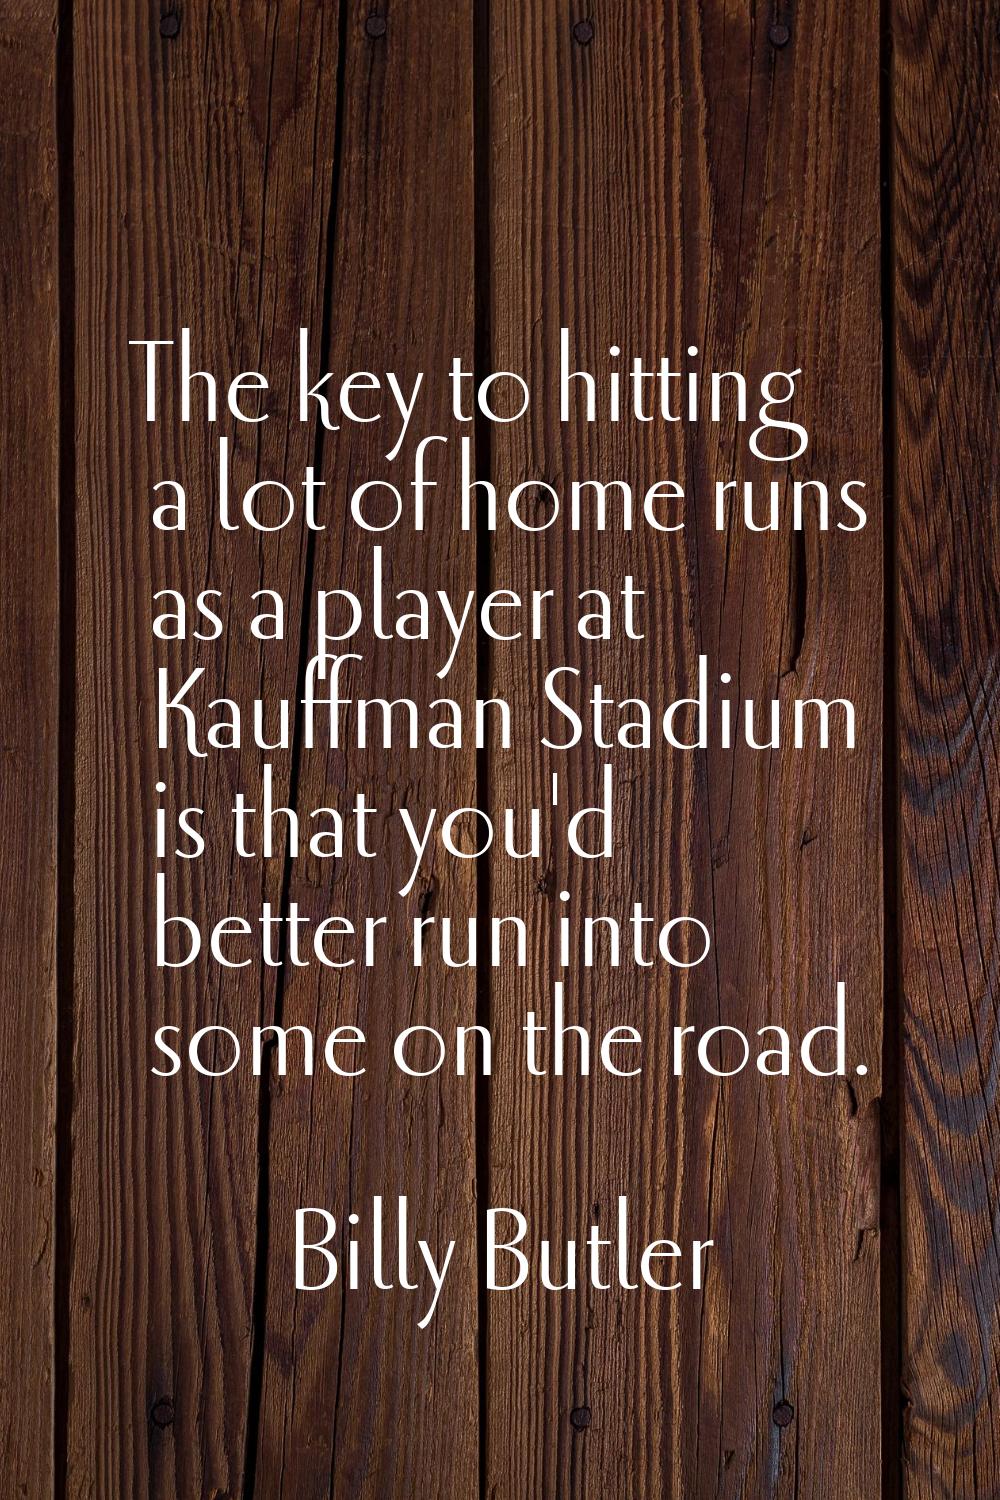 The key to hitting a lot of home runs as a player at Kauffman Stadium is that you'd better run into